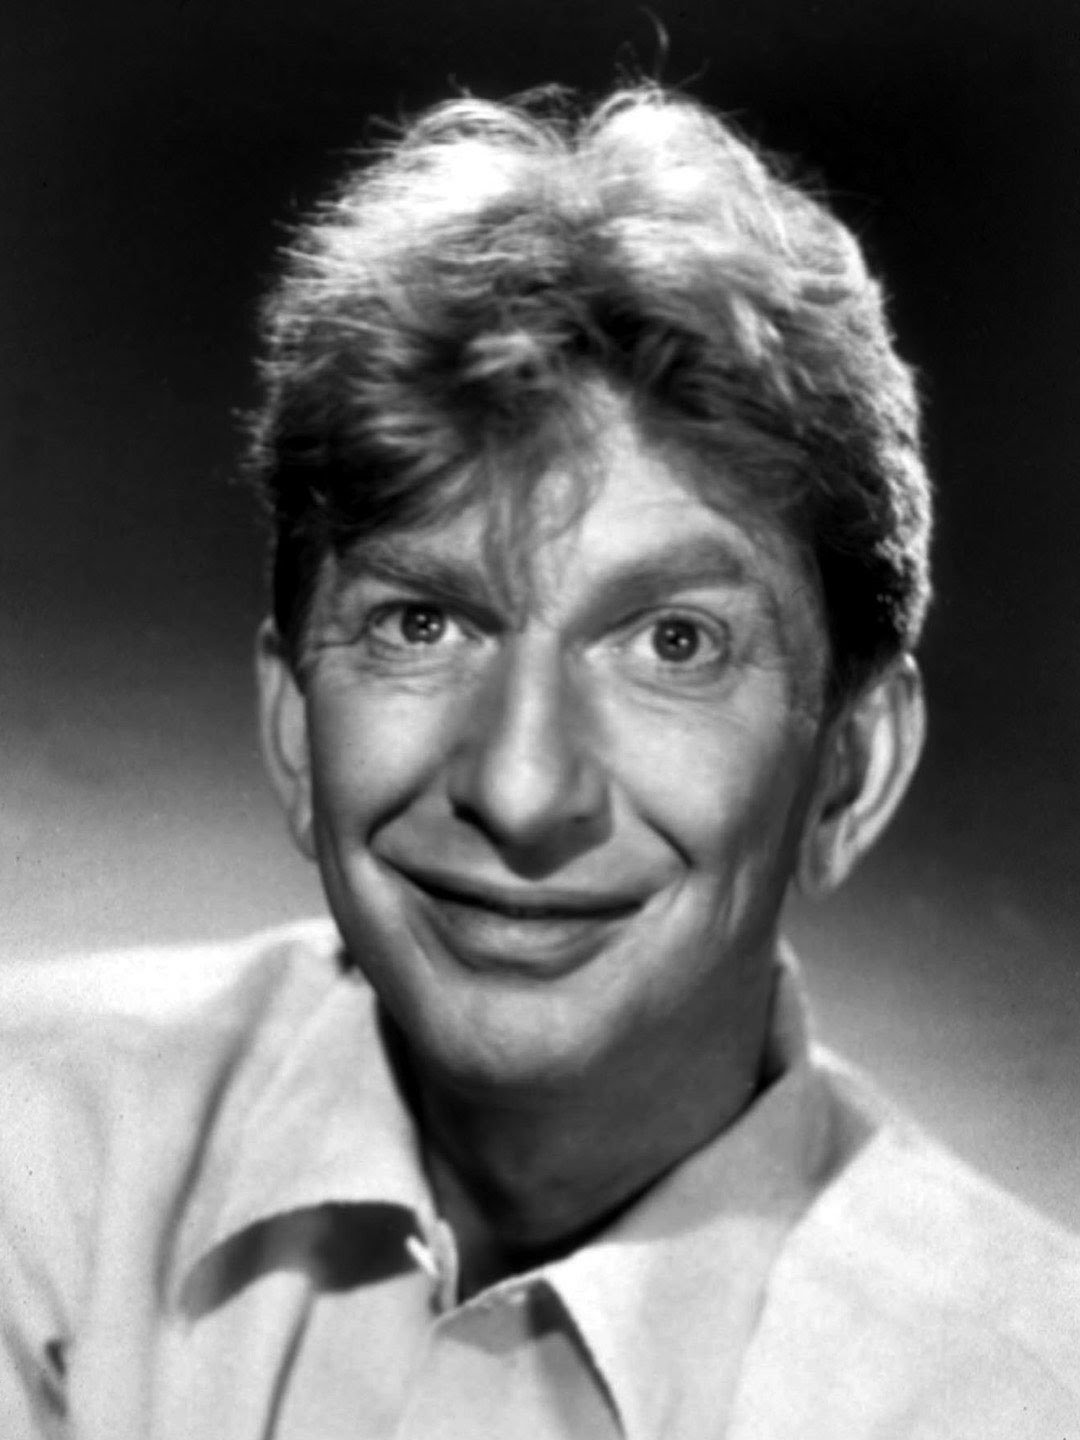 sterling holloway the jungle book